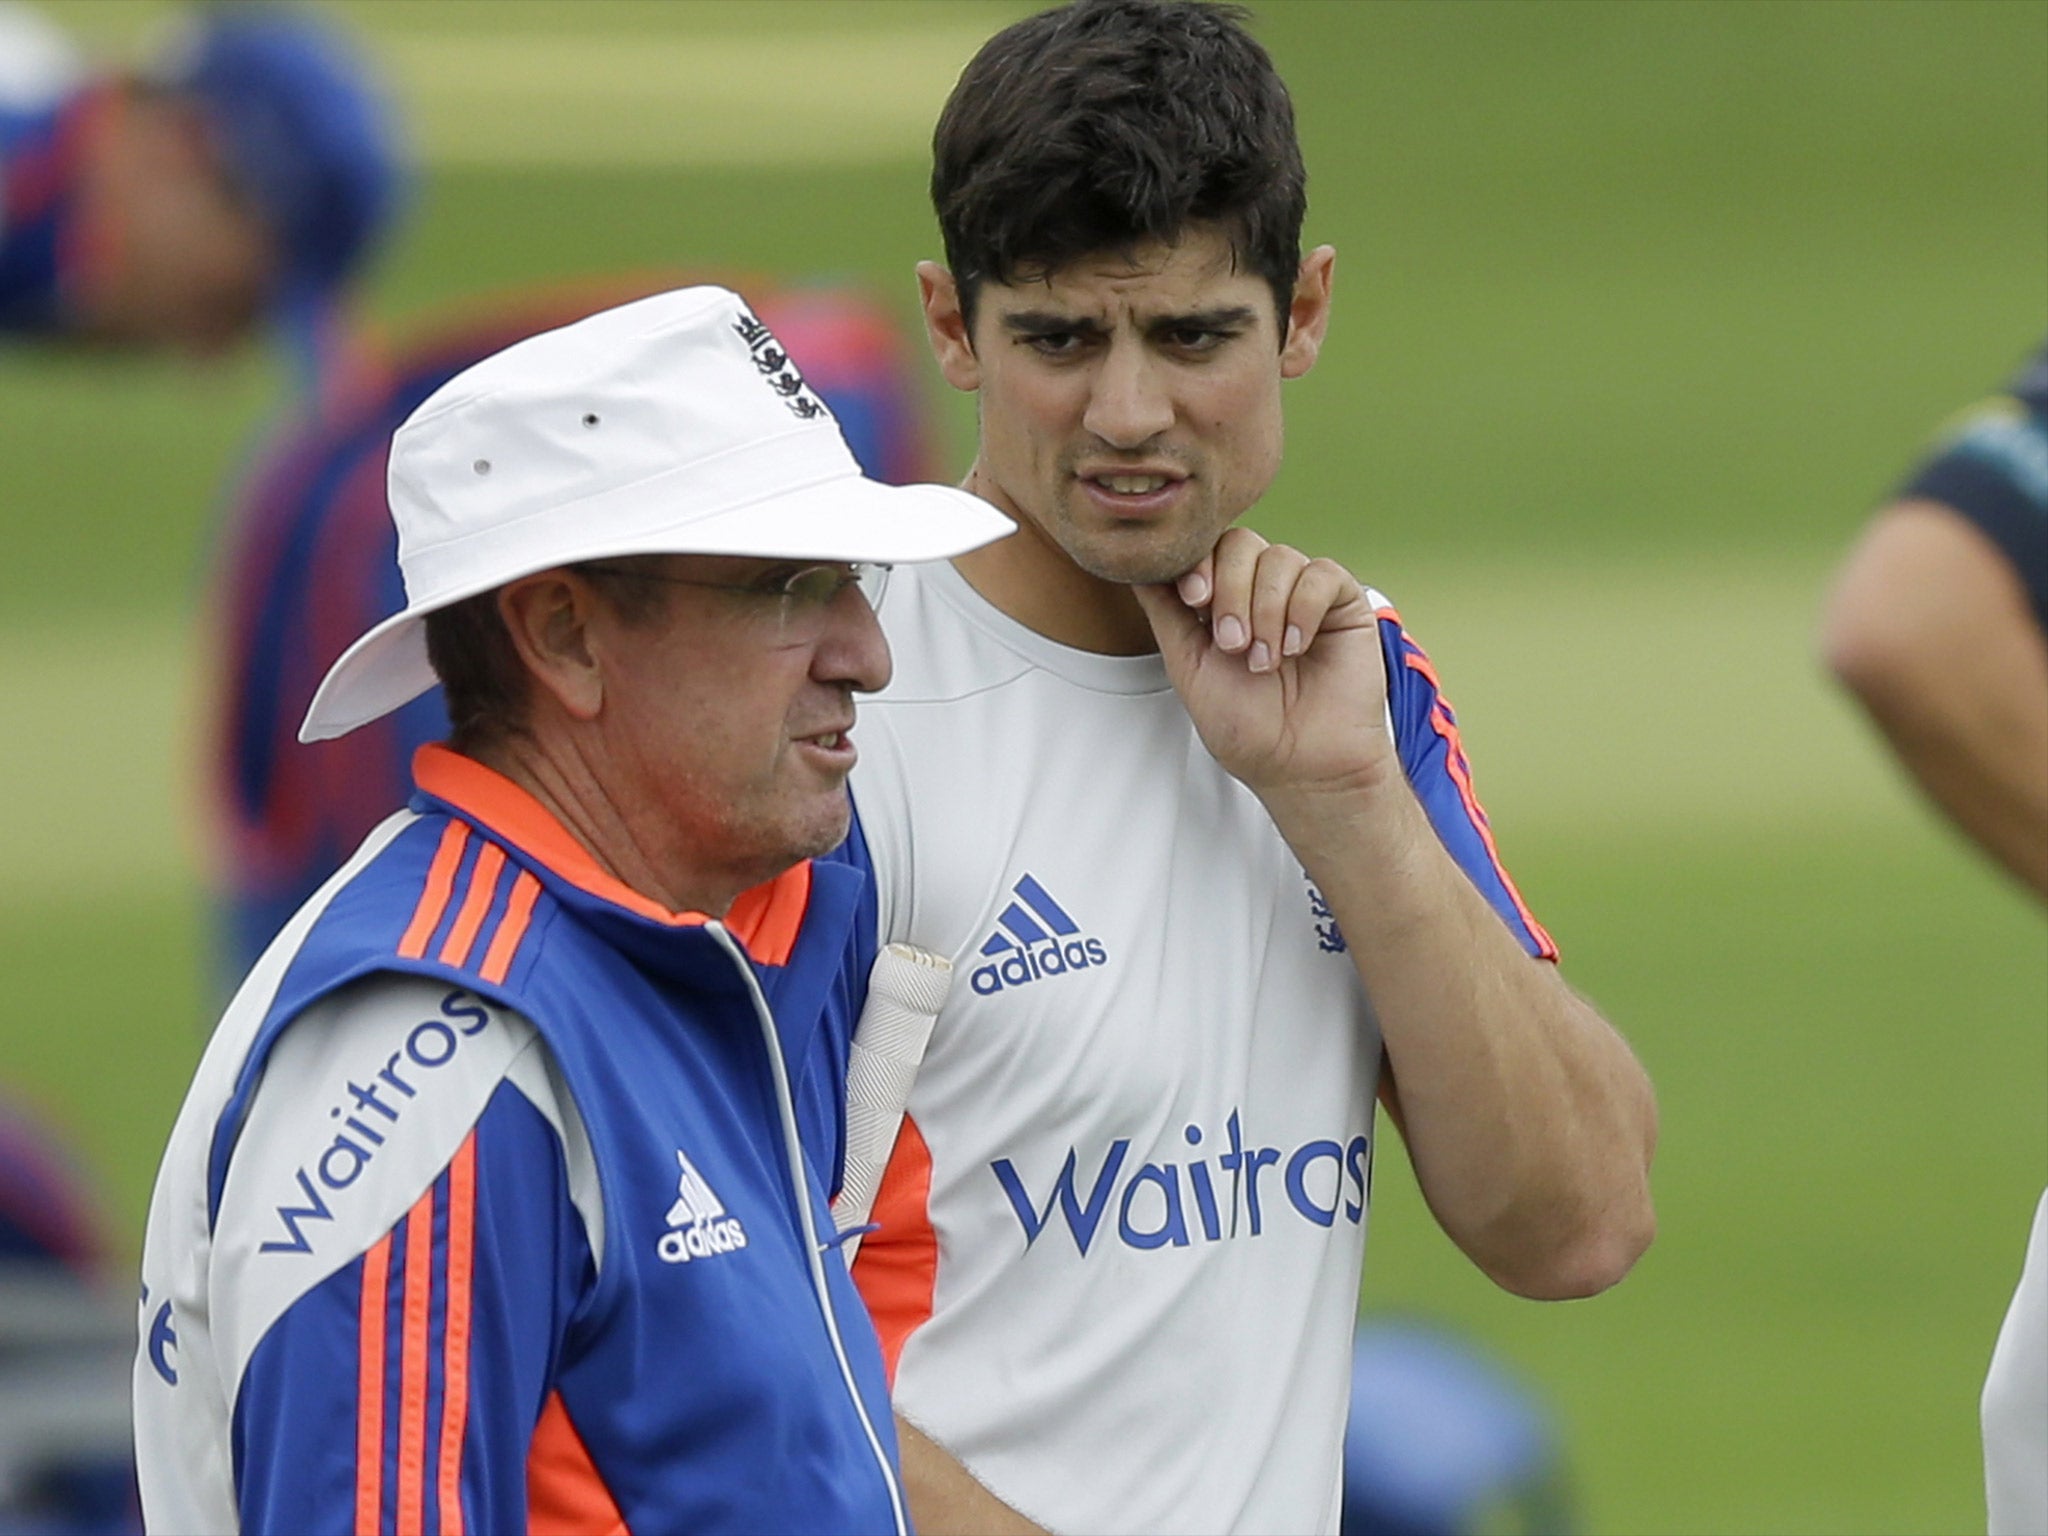 Alastair Cook and Trevor Bayliss discuss their plans for the Second Test at Lord’s